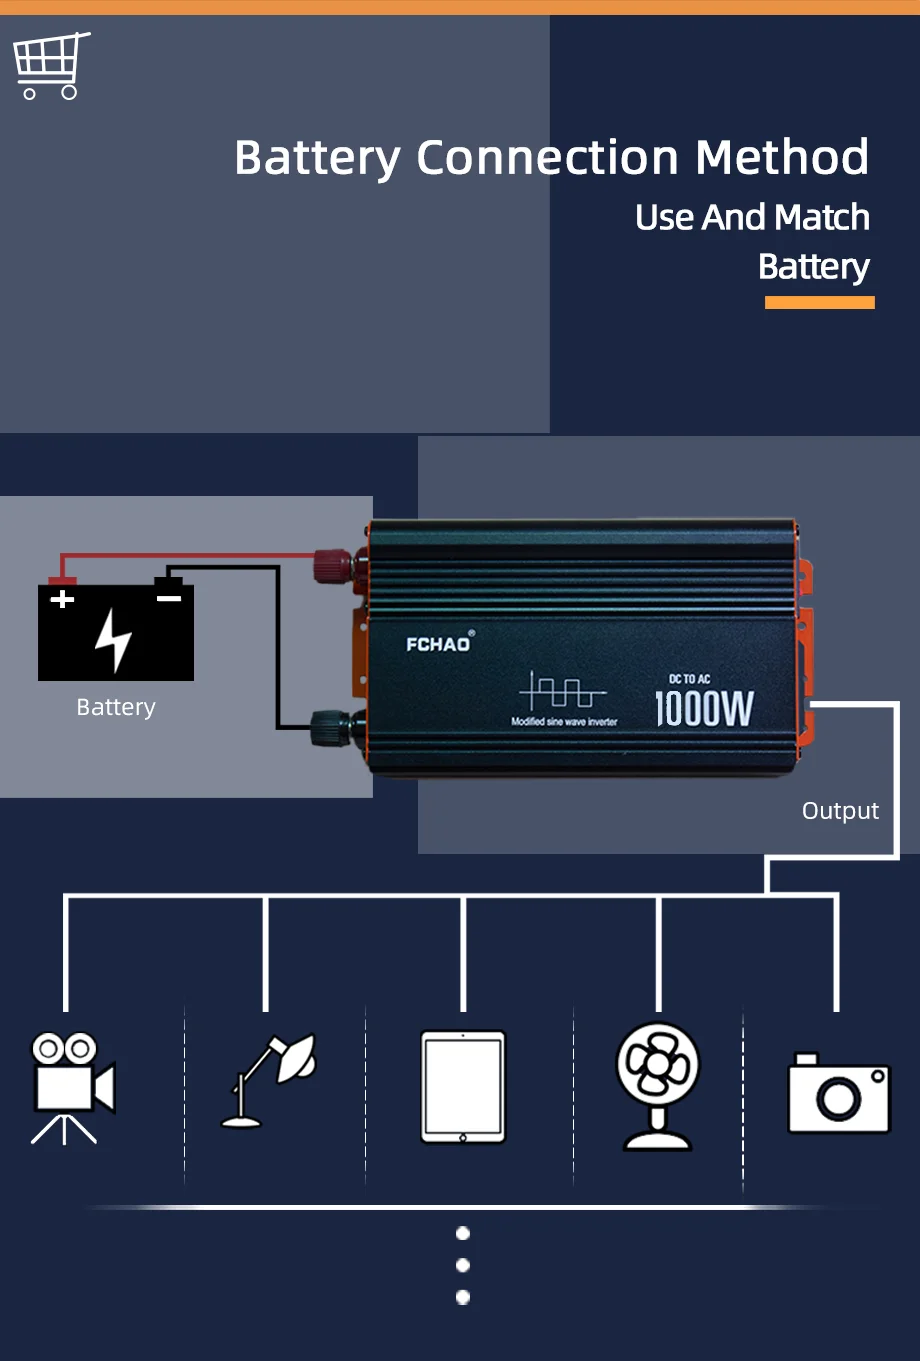 FCHAO 1000W Ups Modified Sine Wave Inverter, Charge a connect battery with AC power and match DC output (12V/24V) for 1000W use.